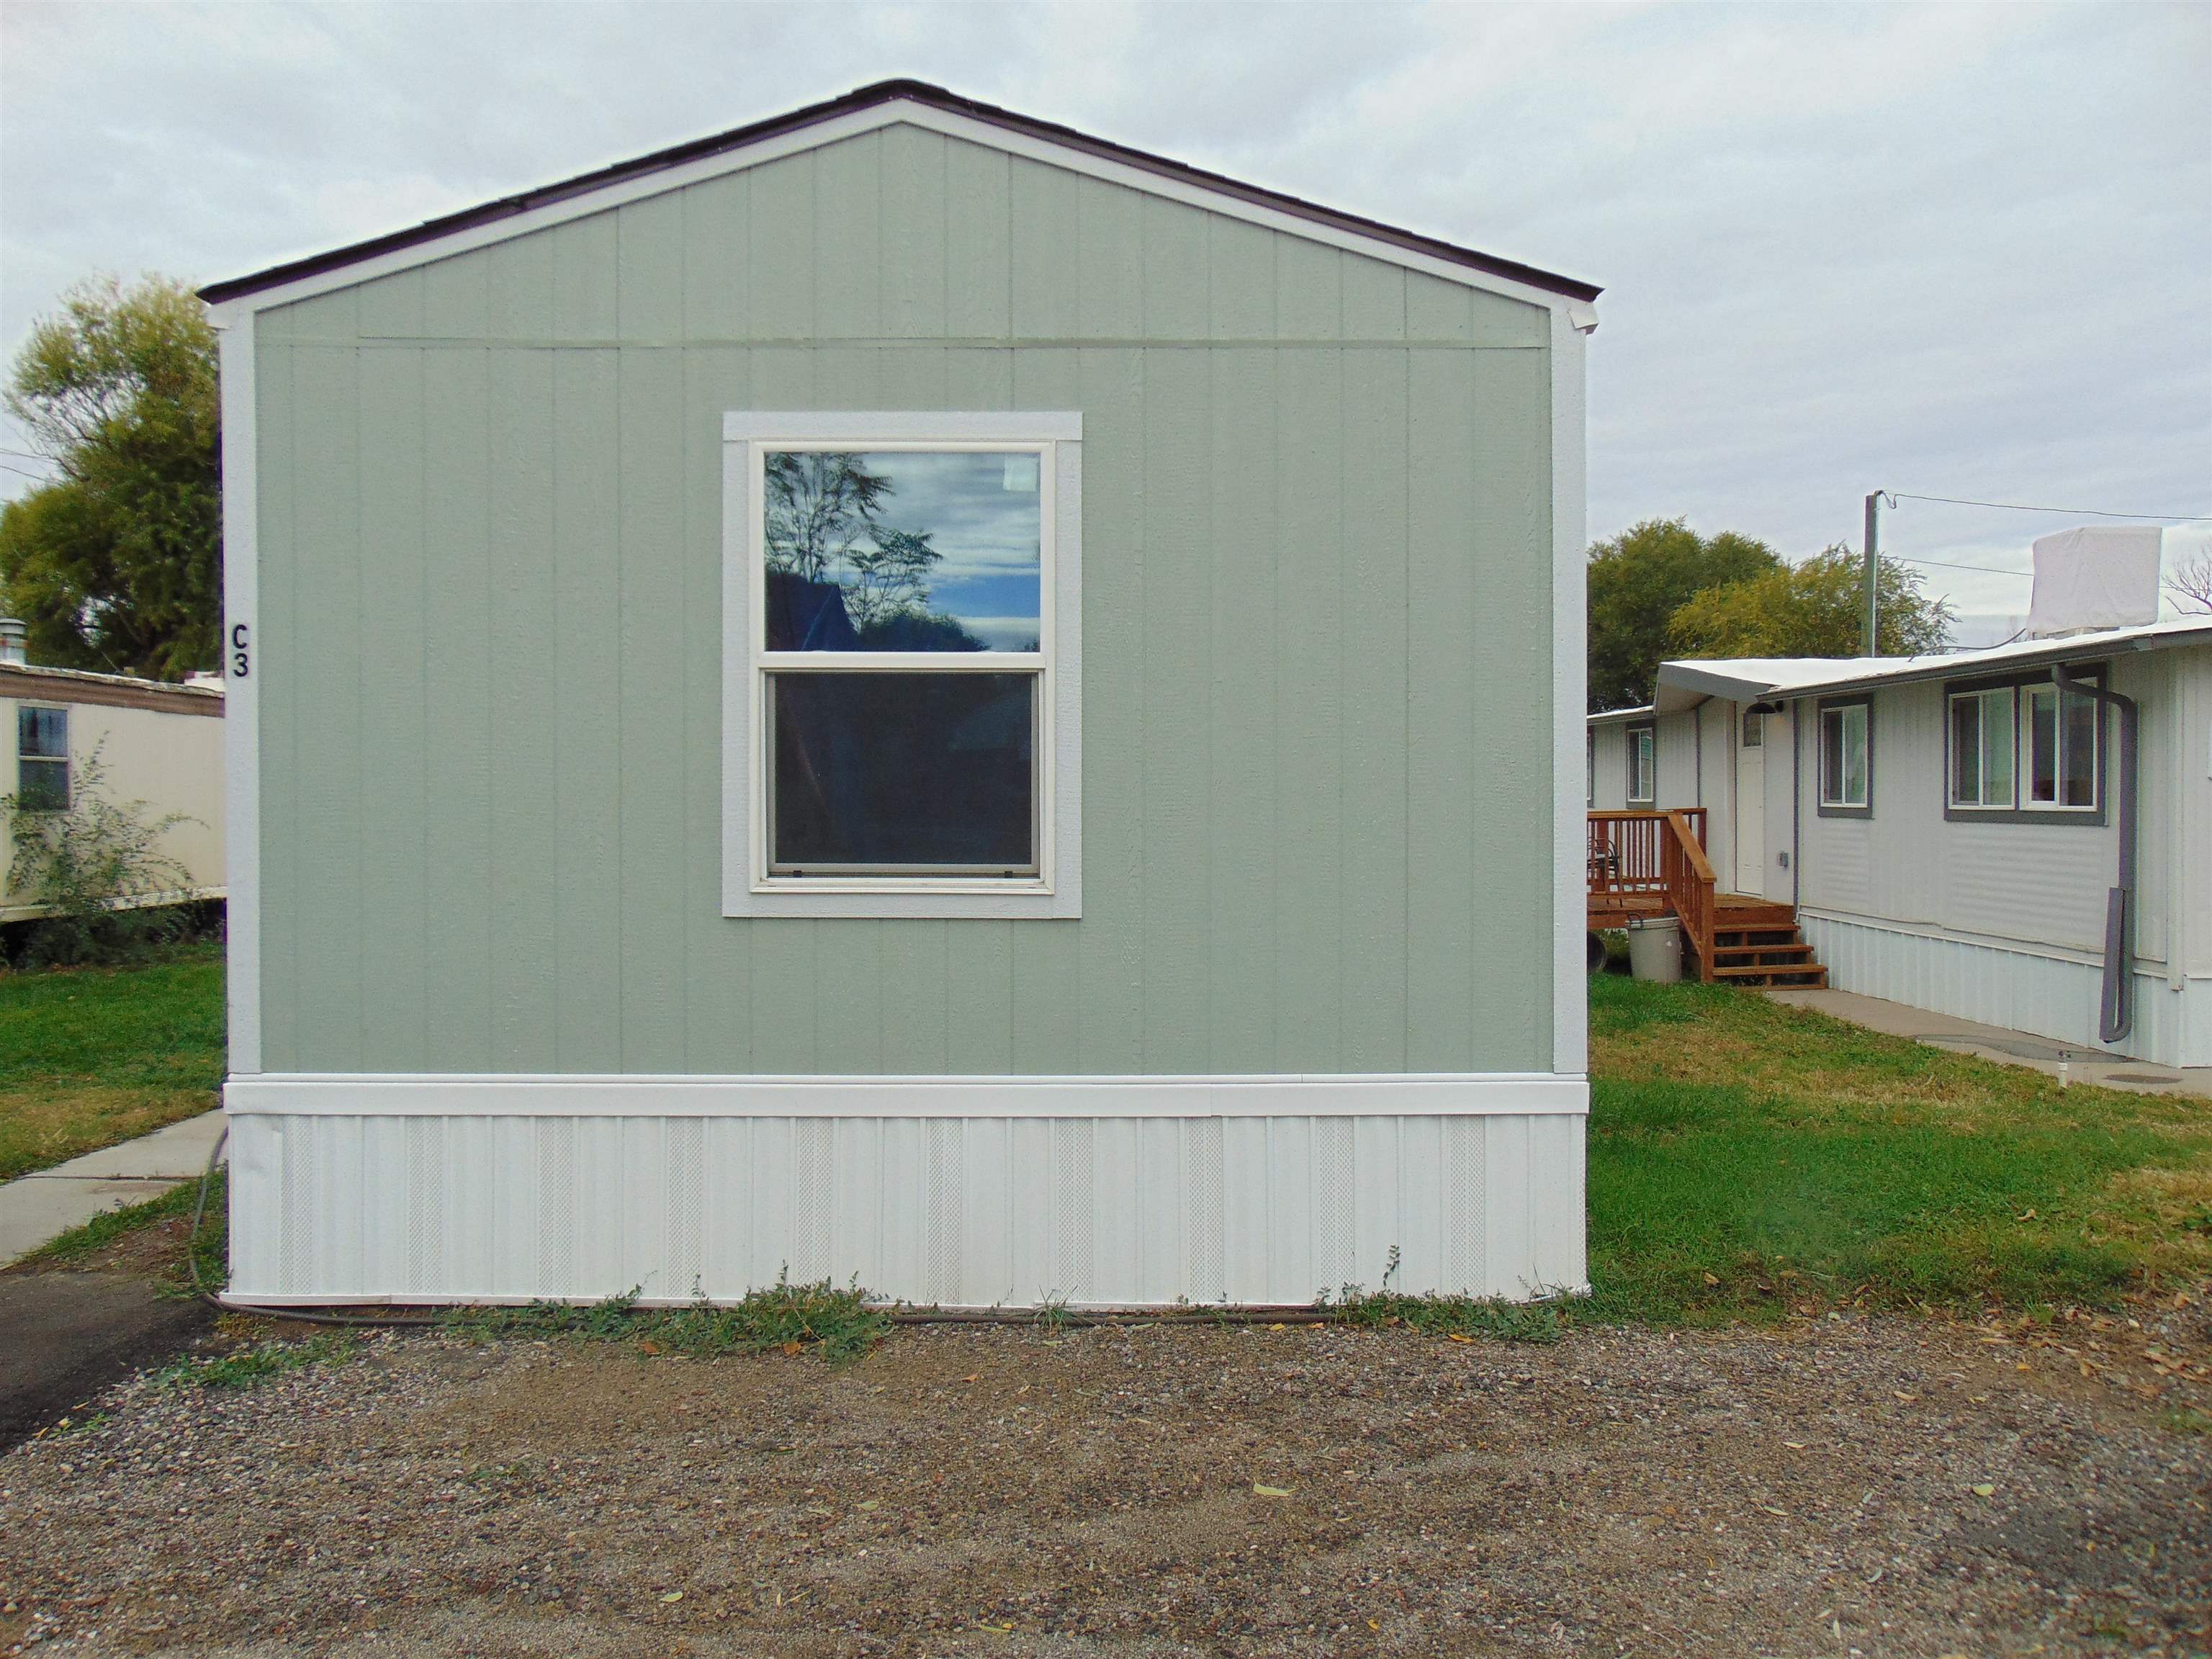 Spacious 3-bedroom, 2-bathroom mobile home, brand new in a quiet, well-established park. Sellers bought home brand new in Sept 2022 so pretty much new. Close to desirable downtown Fruita and schools.